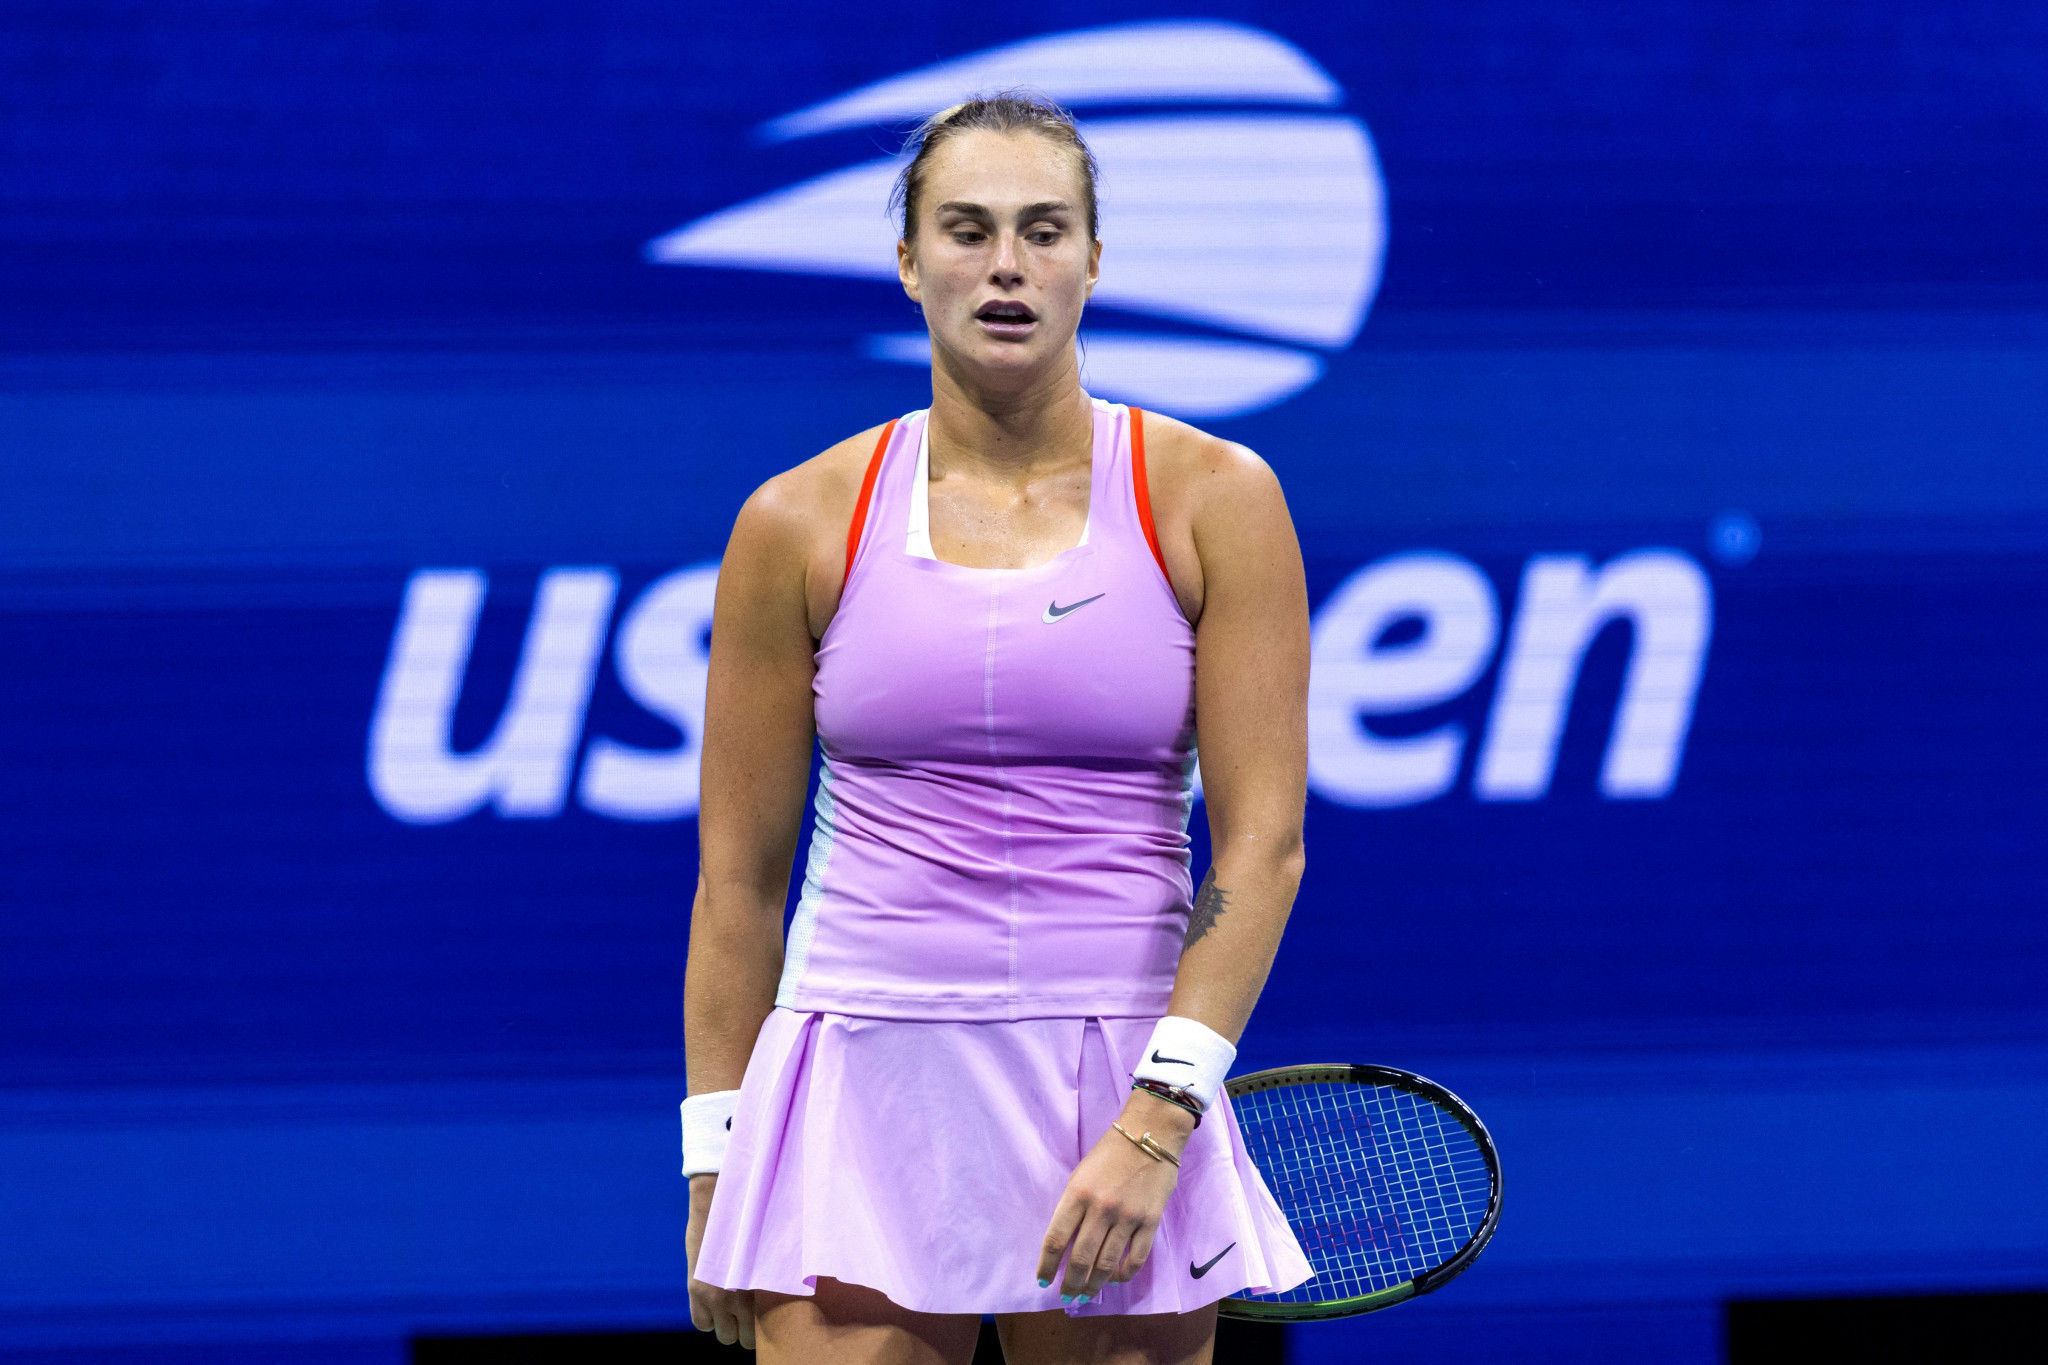 Sabalenka, who is from Belarus but playing as a neutral, has now lost a US Open semi-final in back-to-back years ©Getty Images